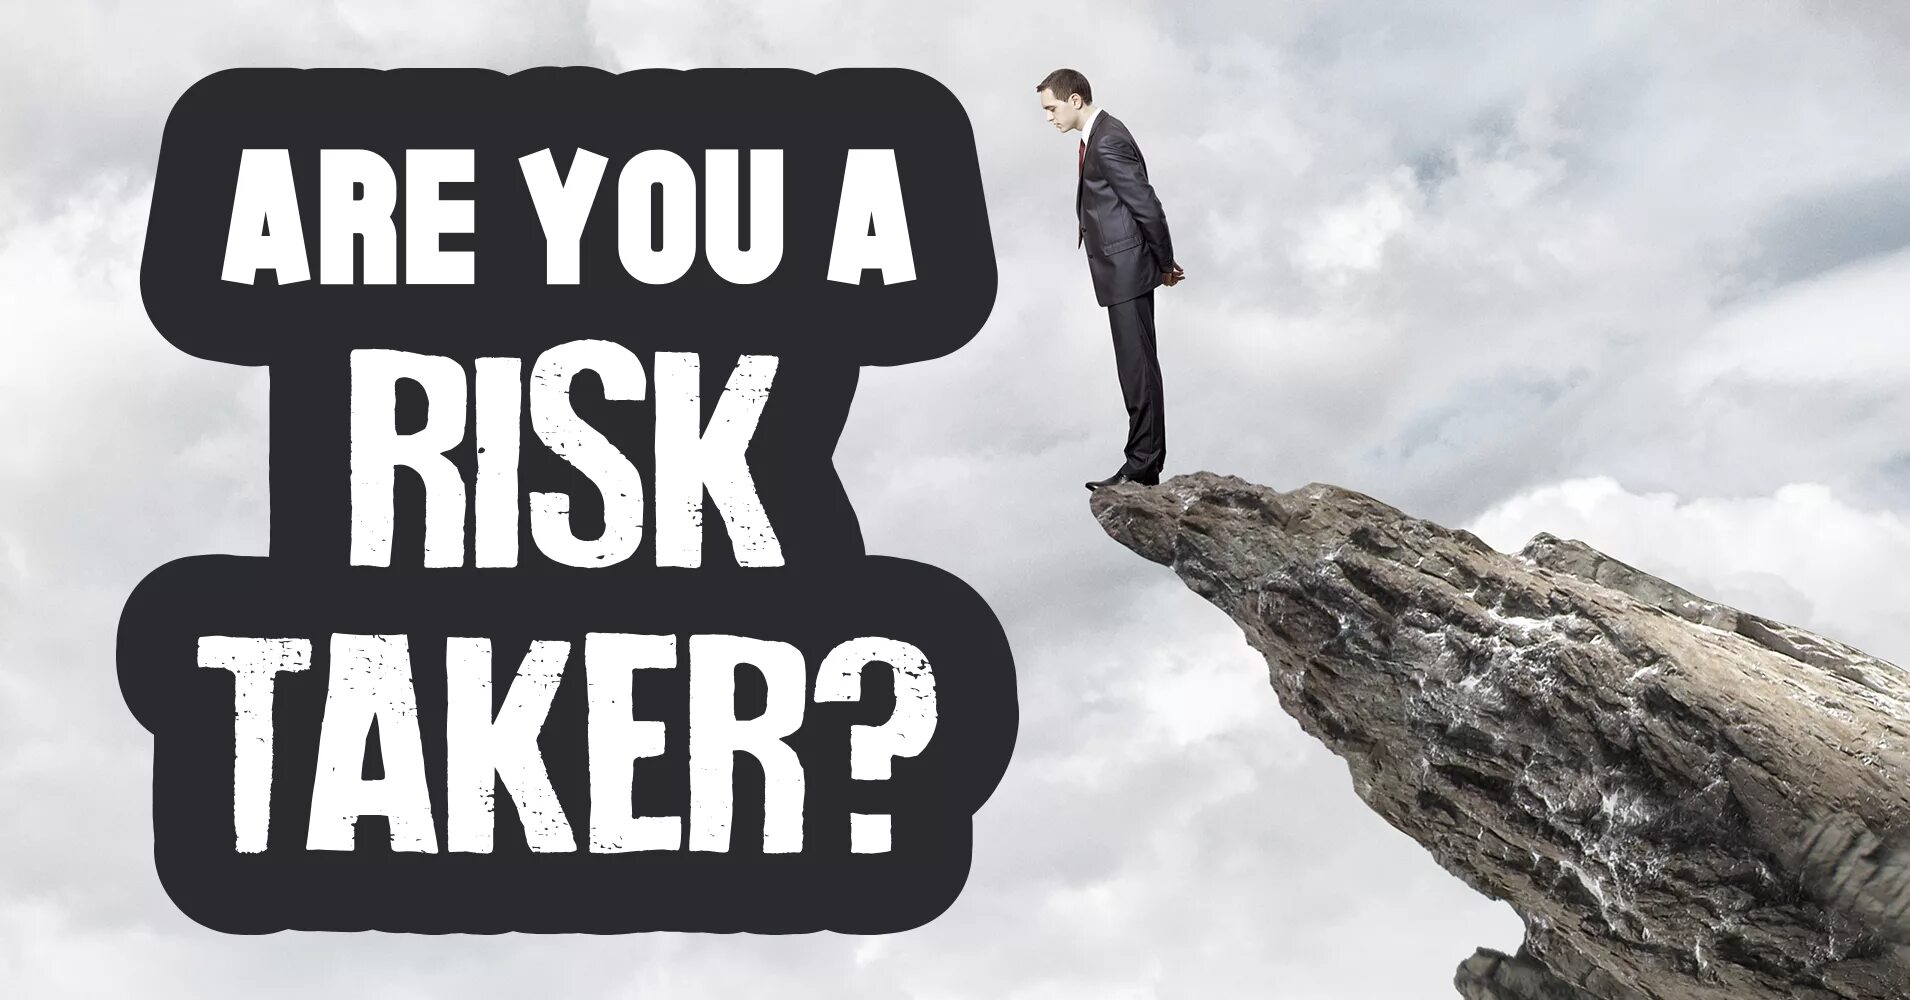 Taking risks. Risk Taker. Риск картинки. Are you a risk Taker. Well here take